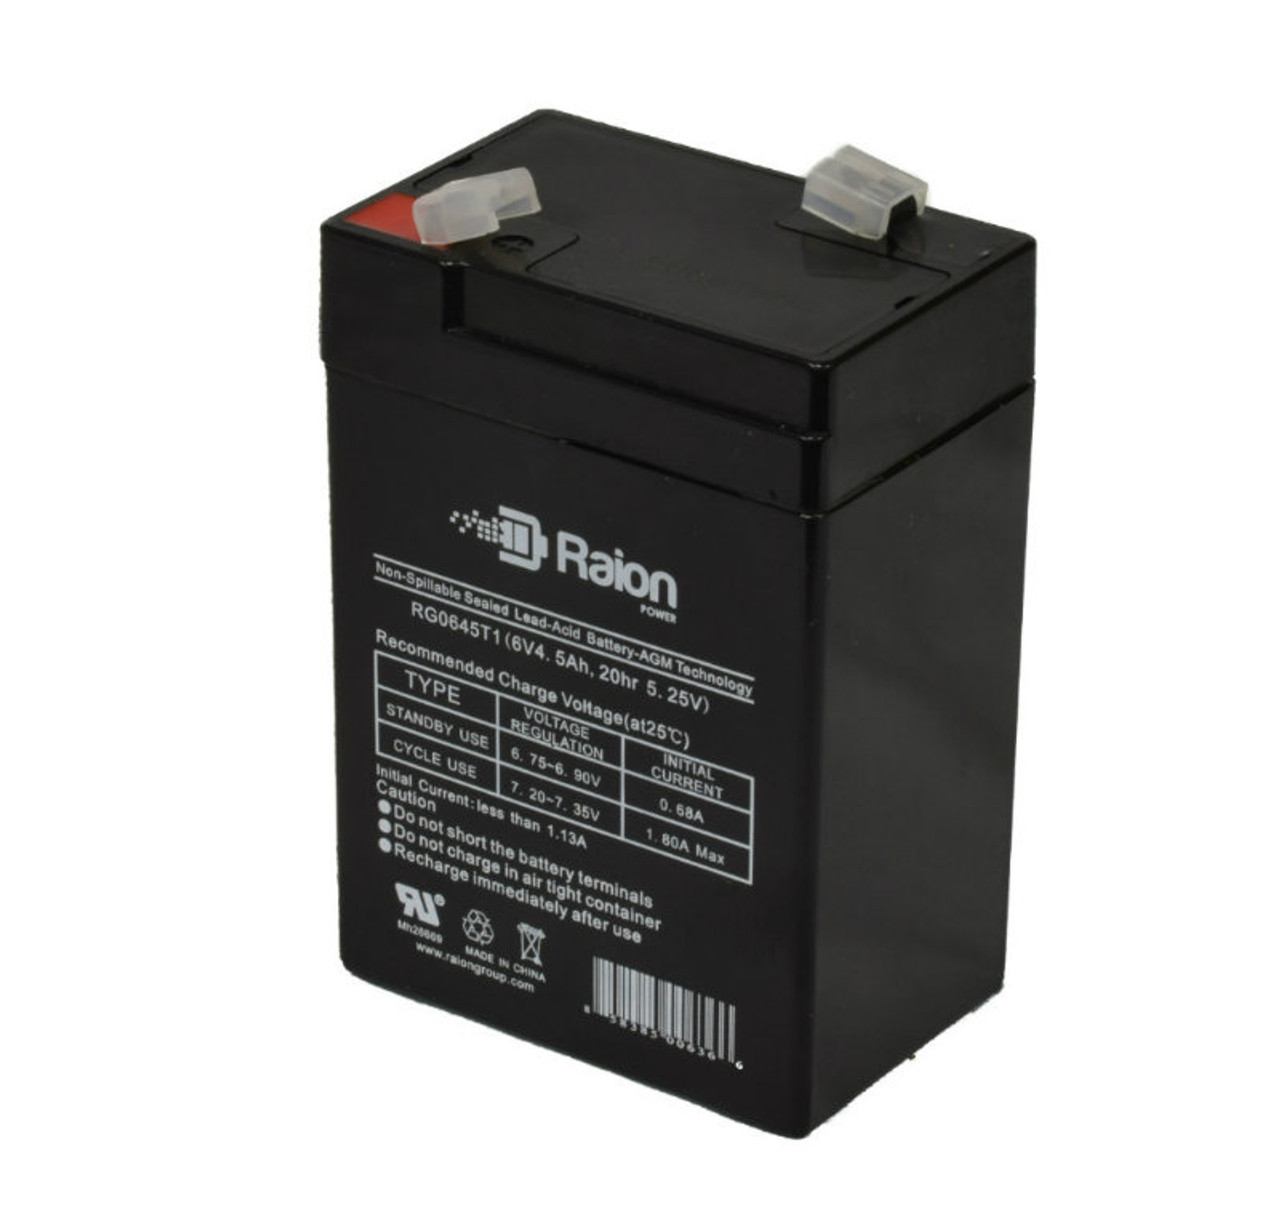 Raion Power RG0645T1 6V 4.5Ah Replacement Battery Cartridge for Motoma MS6V4R